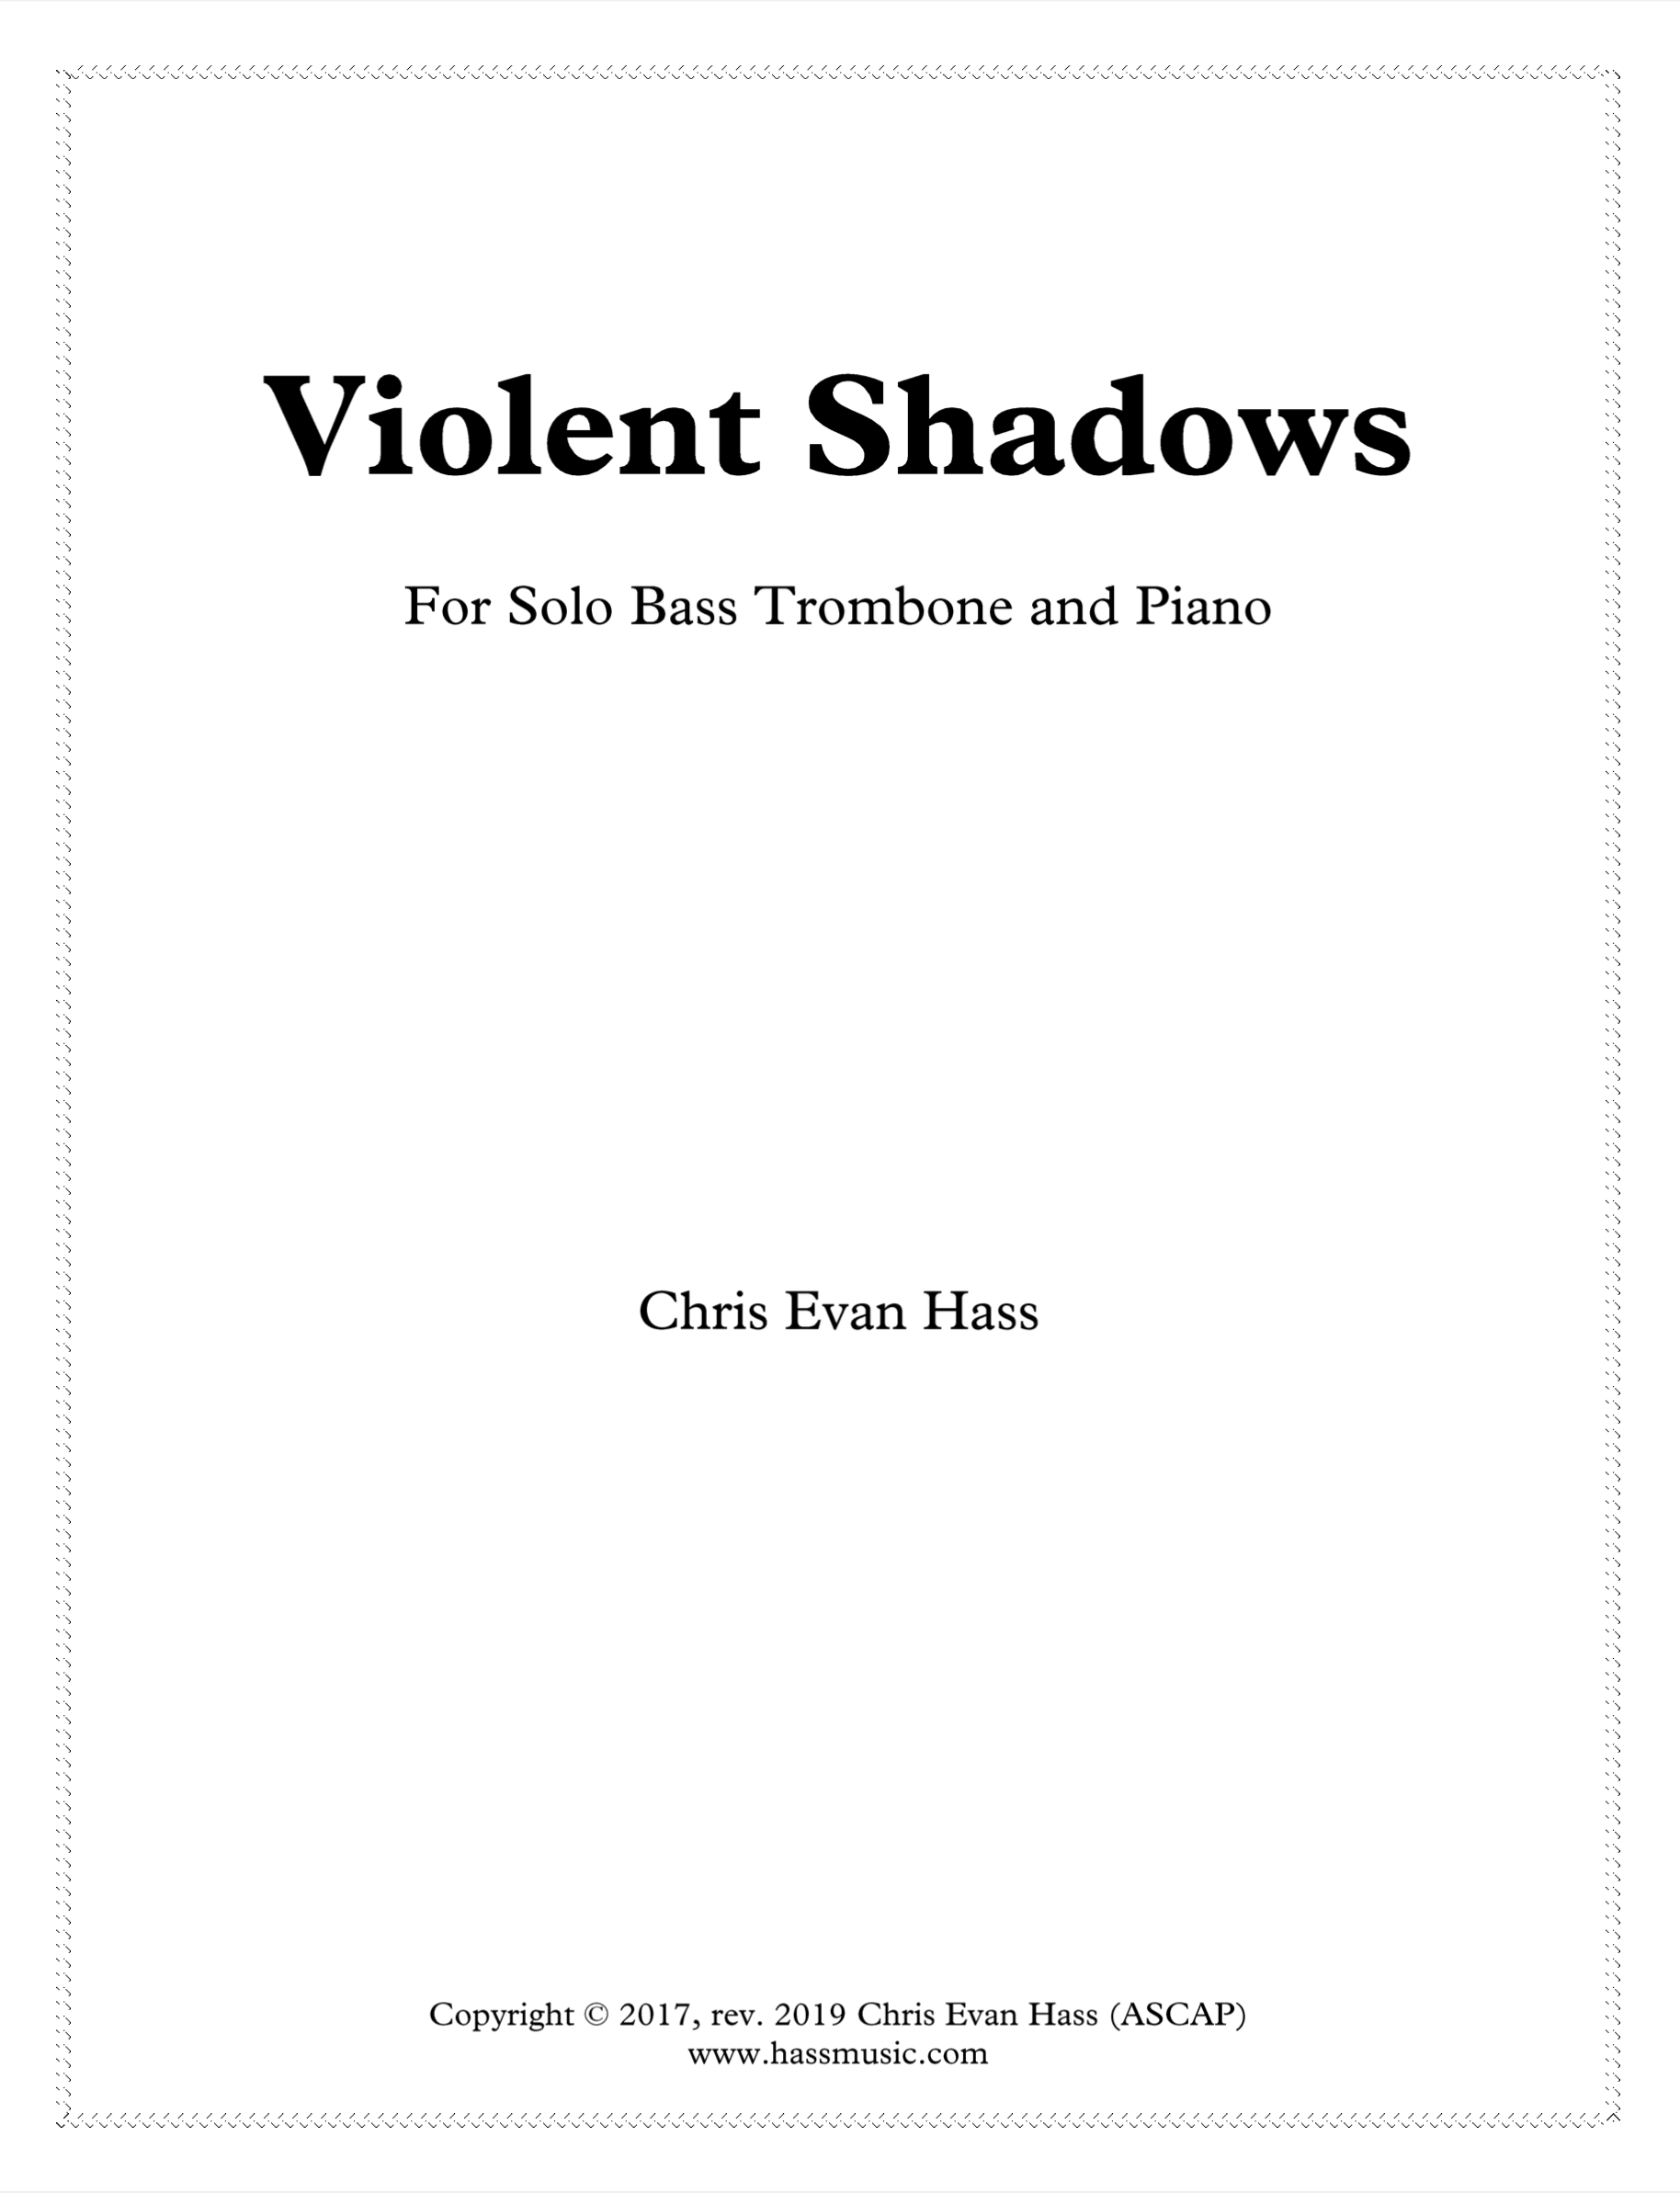 Violent Shadows by Chris Evan Hass